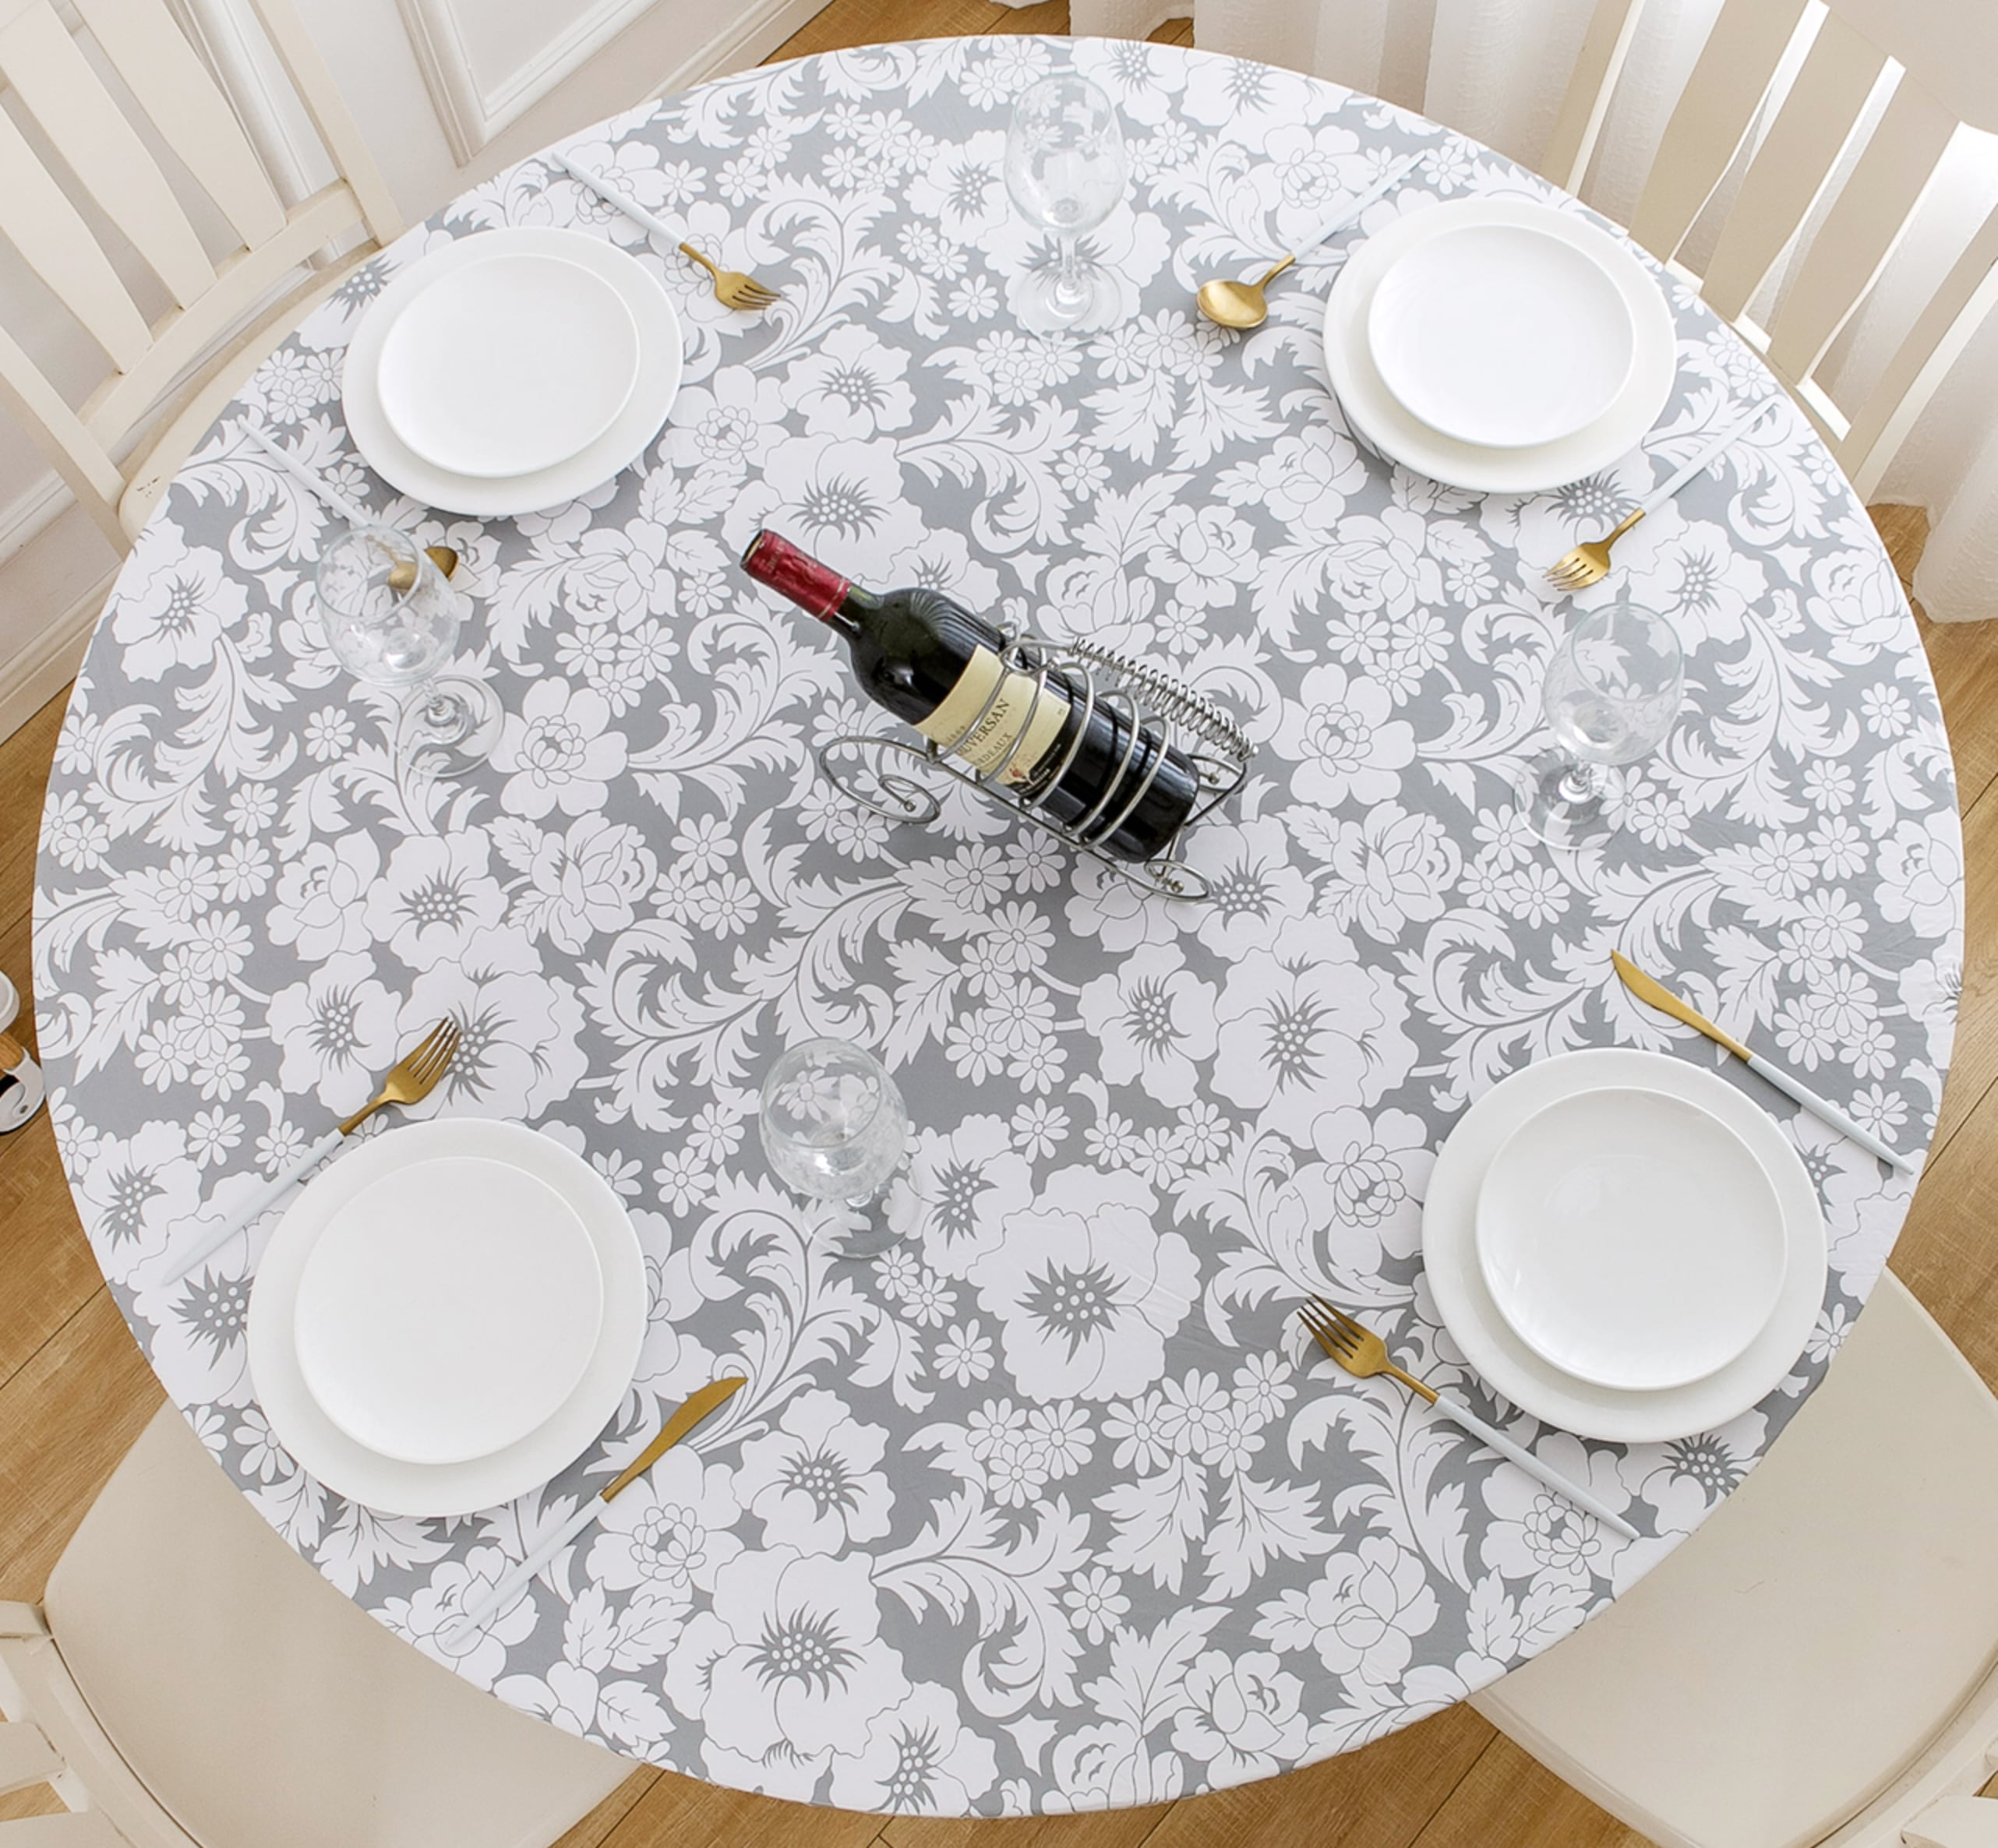 LIBERECOO Round Vinyl Fitted Tablecloth with Flannel Backing Elastic Edge Design Table Cover Waterproof Oil-Proof PVC Table Cloth Stain-Resistant Wipeable for Round Table 